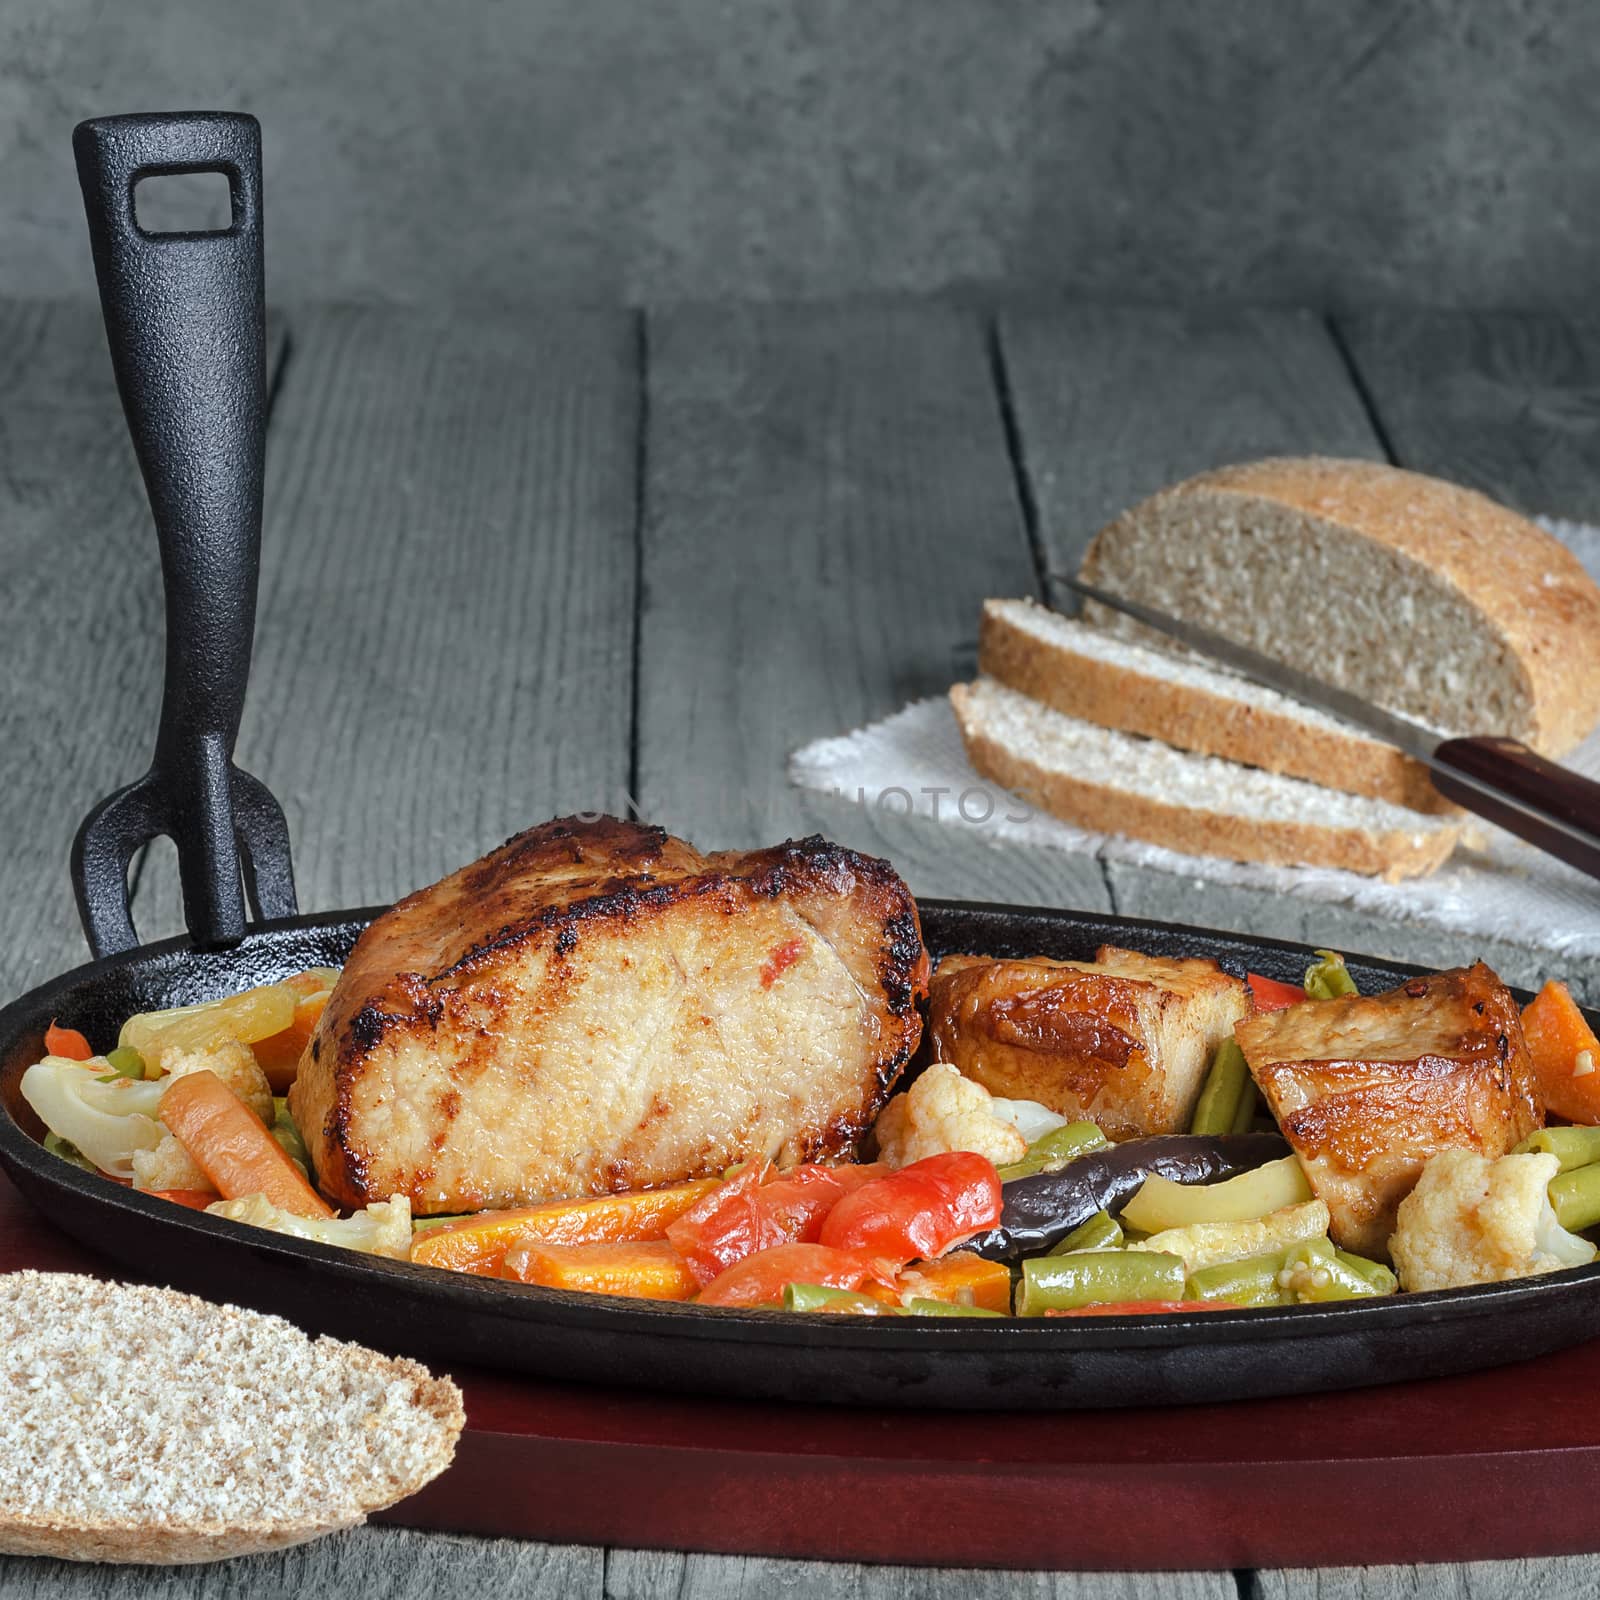 Fried pork with vegetables in a cast iron skillet and a wooden stand. Blue gray wood background, rustic style.